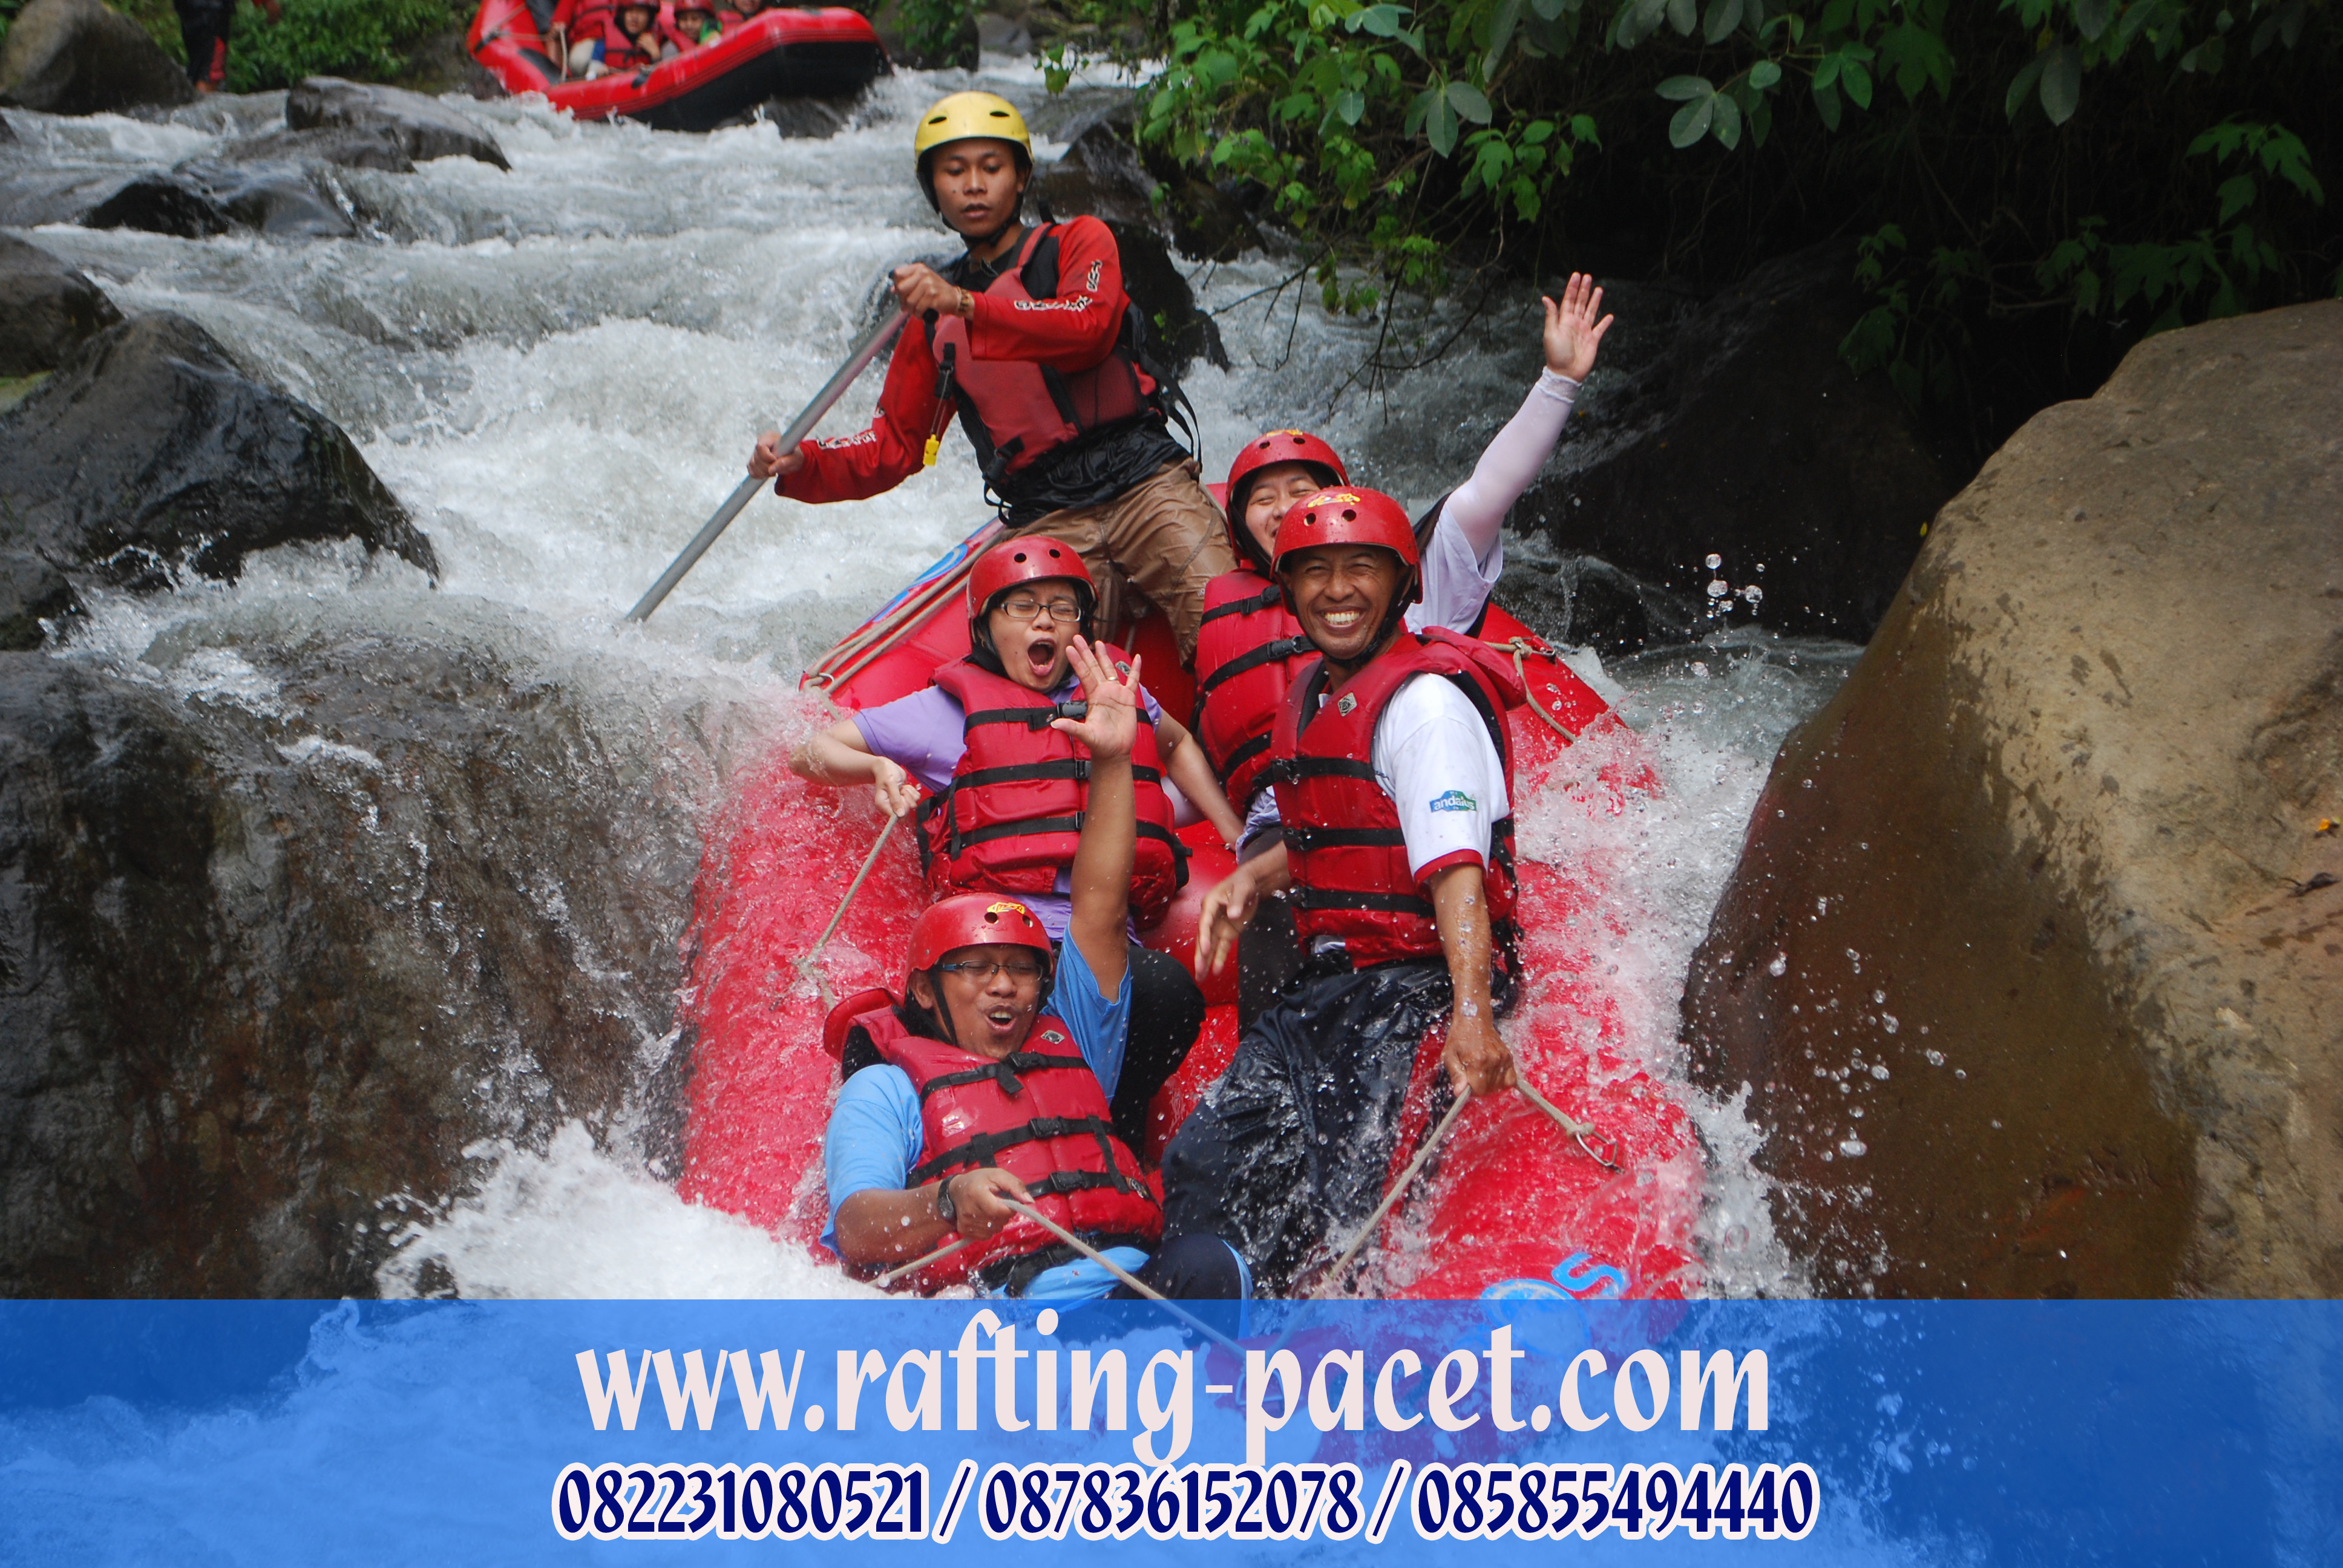 rafting pacet sungai, tos rafting pacet, obech rafting pacet, rafting di pacet jawa timur, rafting pacet mojokerto, rafting pacet jawa timur, rafting di pacet, rafting murah di pacet, obech rafting di pacet, rafting murah pacet, harga rafting obech pacet, paket rafting pacet, tempat wisata rafting pacet,